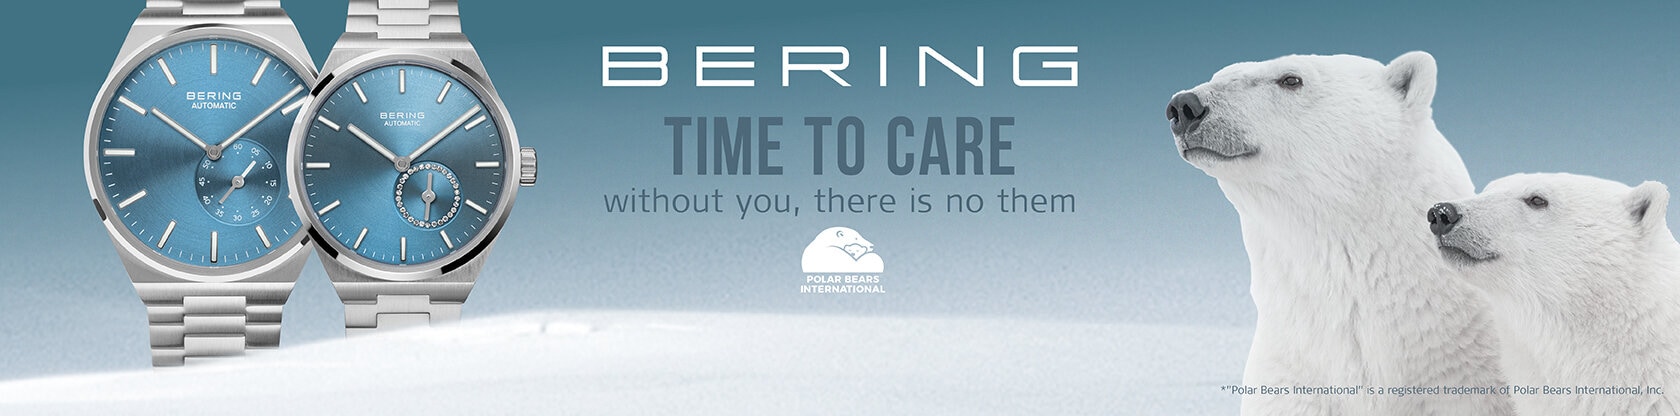 Bering - Time to Care